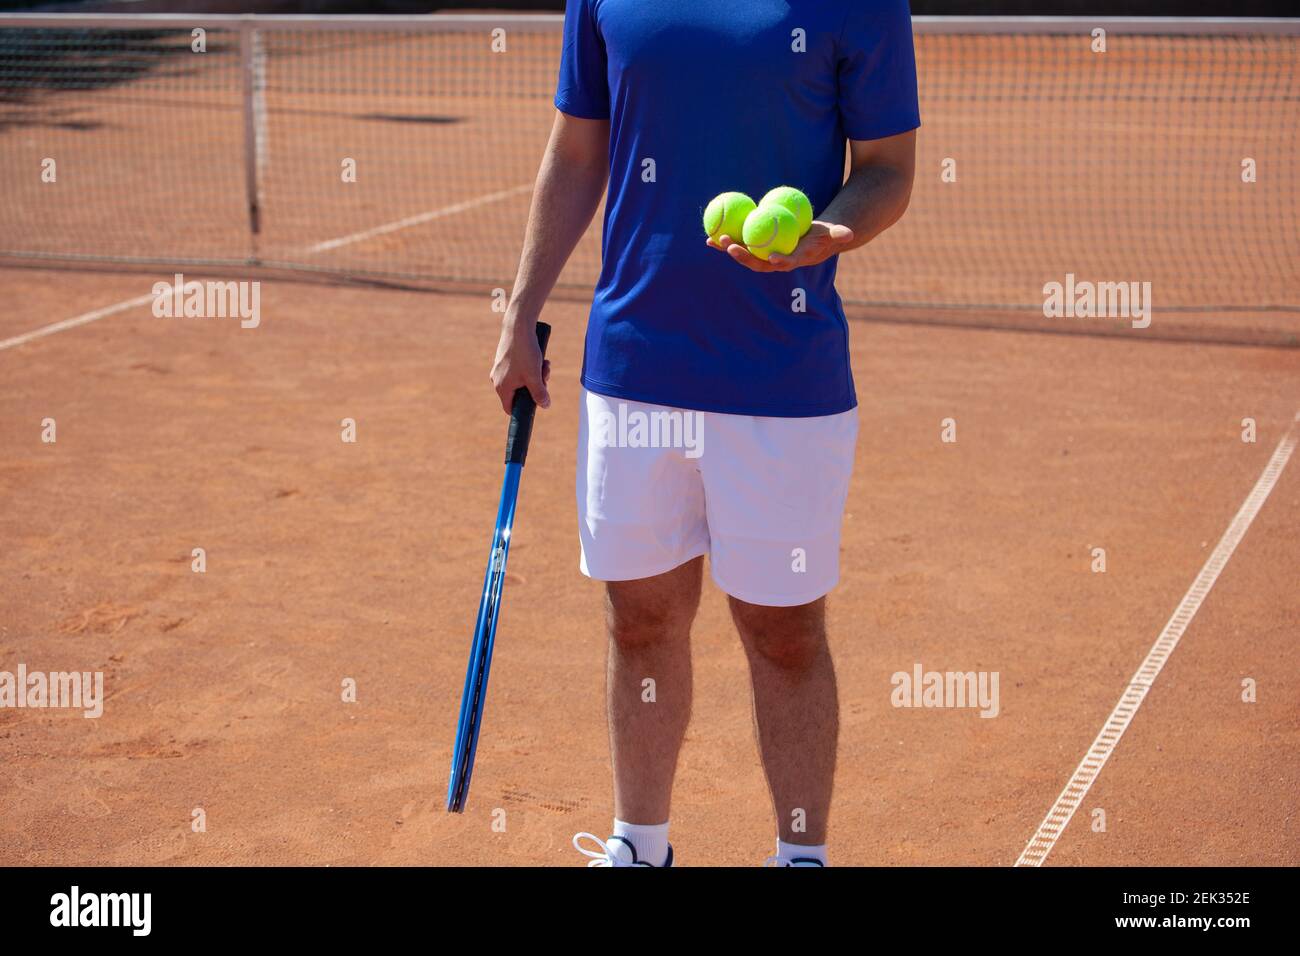 Tennis player holding a tennis racket and three balls on a tennis clay field Stock Photo